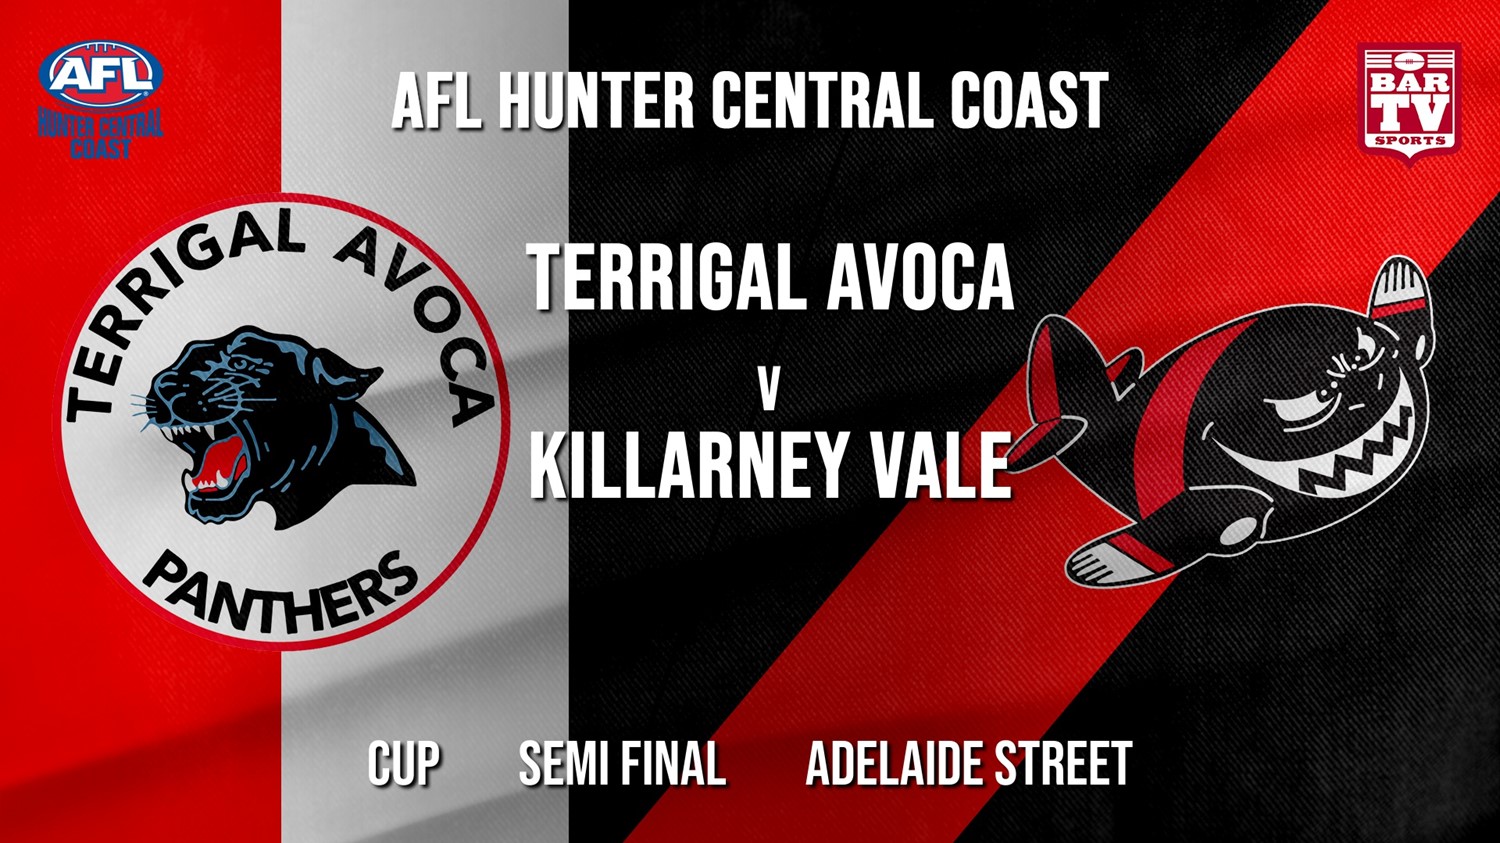 AFL HCC Semi Final - Cup - Terrigal Avoca Panthers v Killarney Vale Bombers Minigame Slate Image